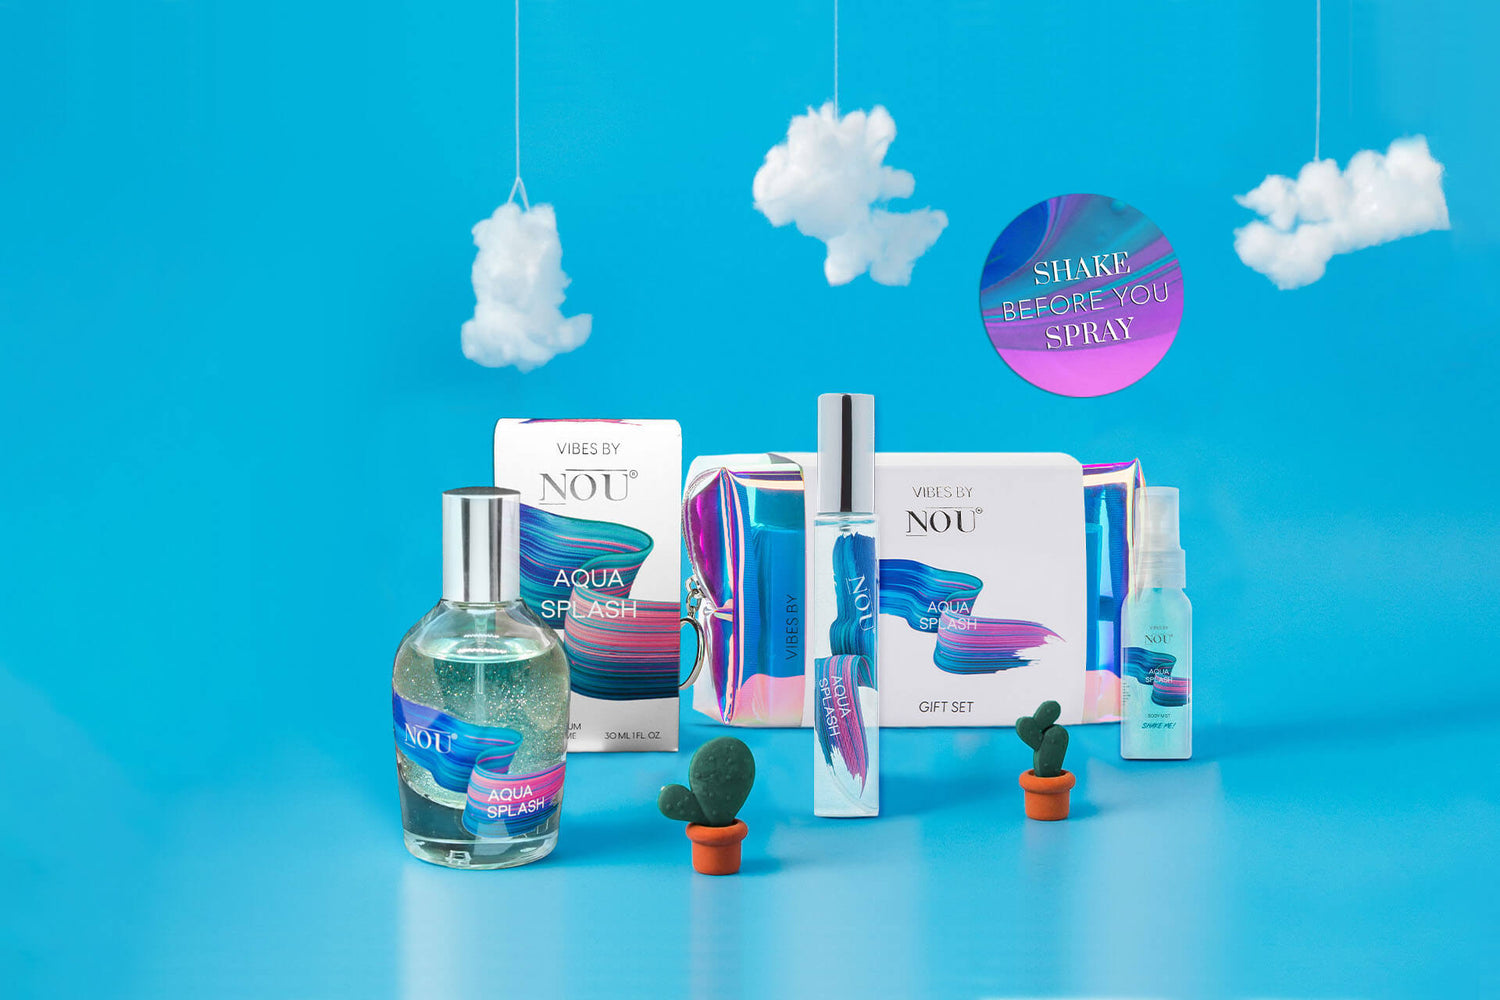 Vibes by Nou pack - Perfume sale for women & men